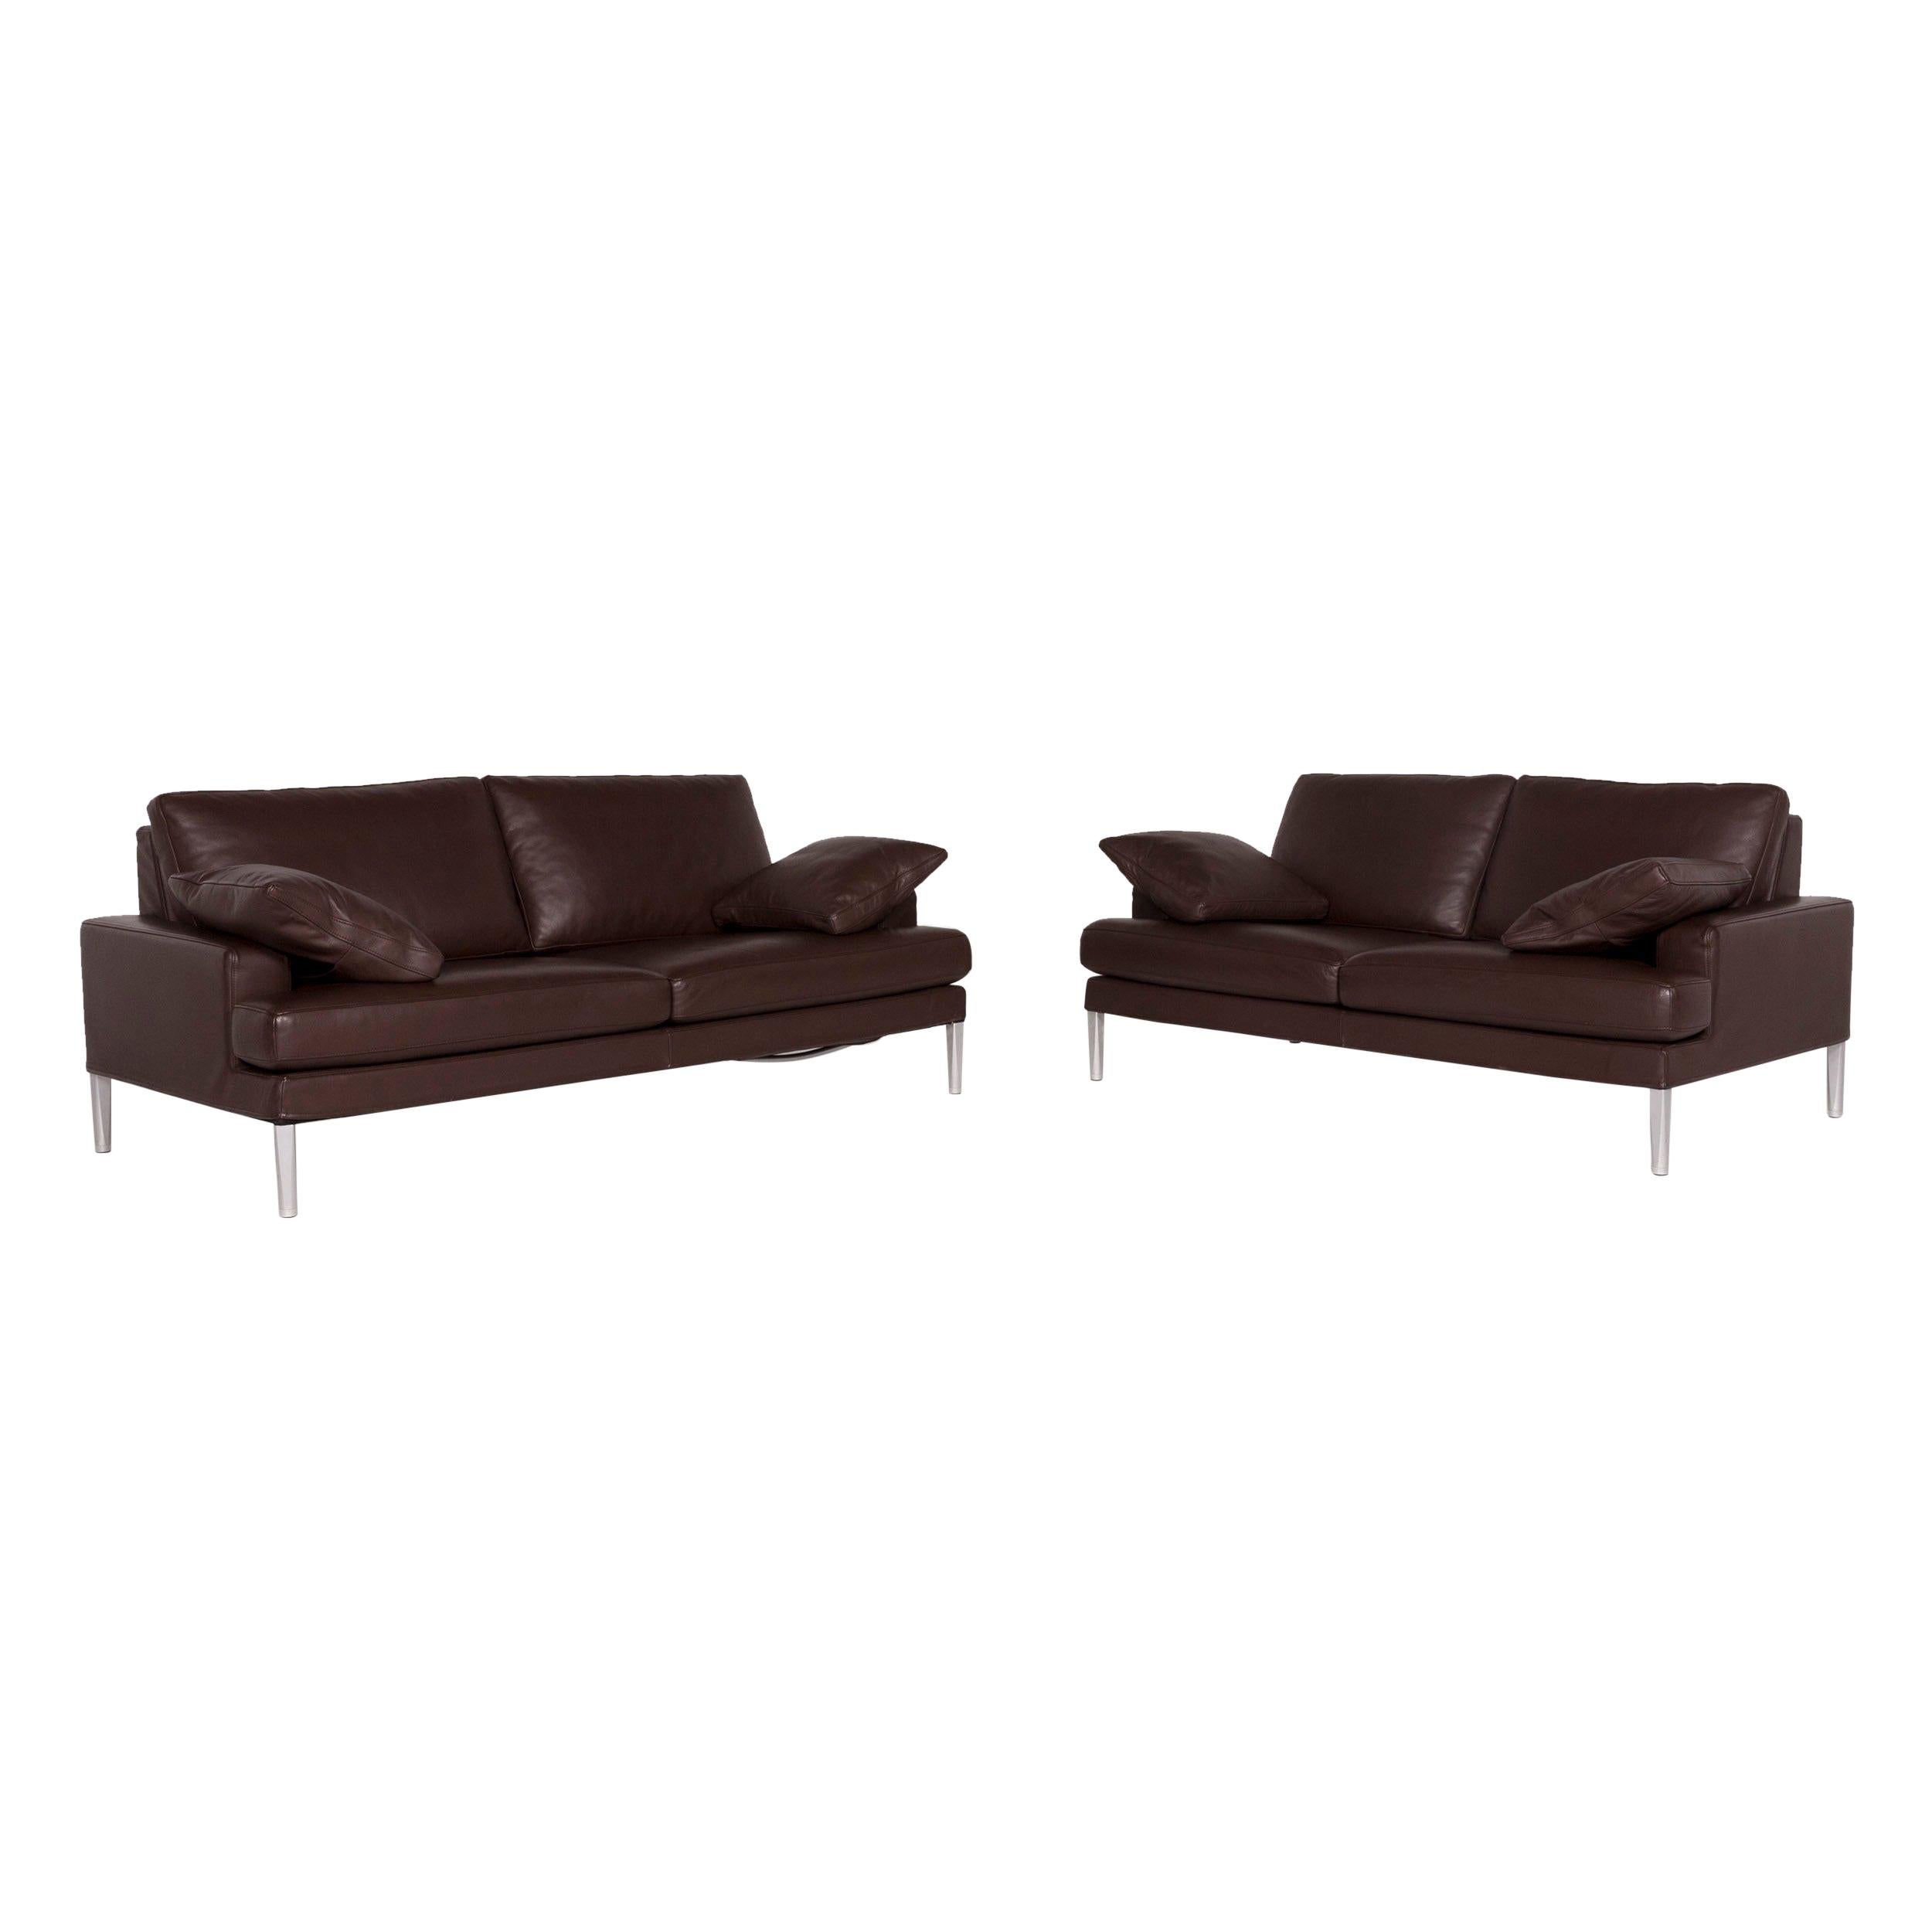 FSM Clarus Leather Sofa Set Brown Dark Brown 1 Three-Seat 1 Two-Seat For Sale